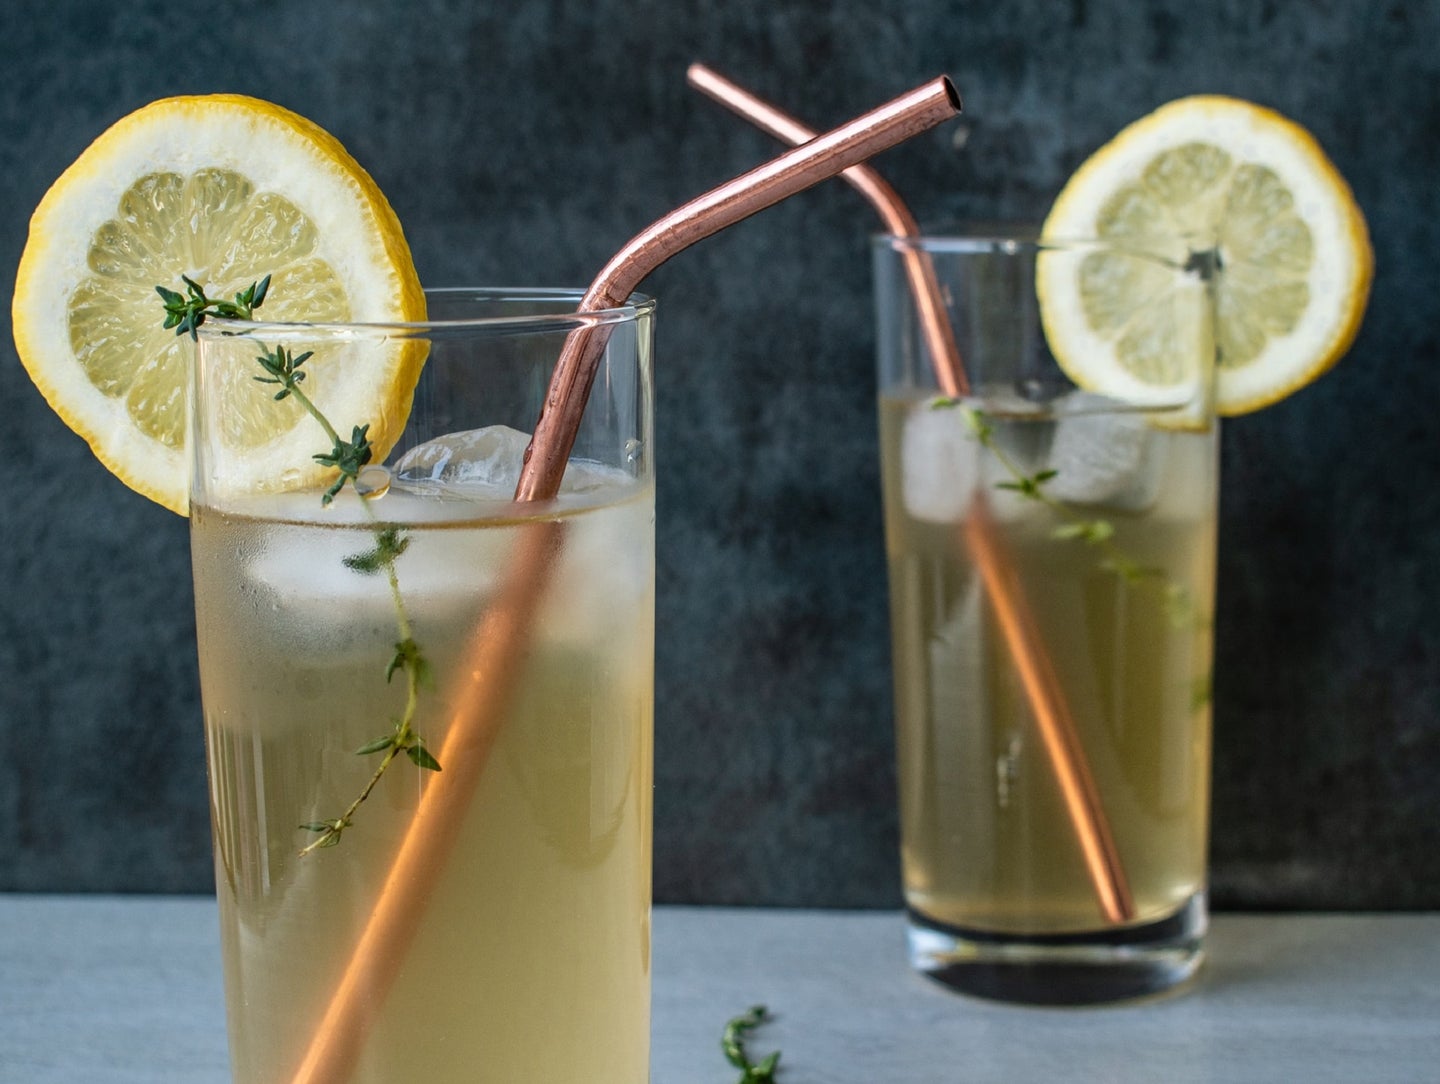 Yellow citrus home-brewed iced tea with lemon slices and metal straws in front of a black background